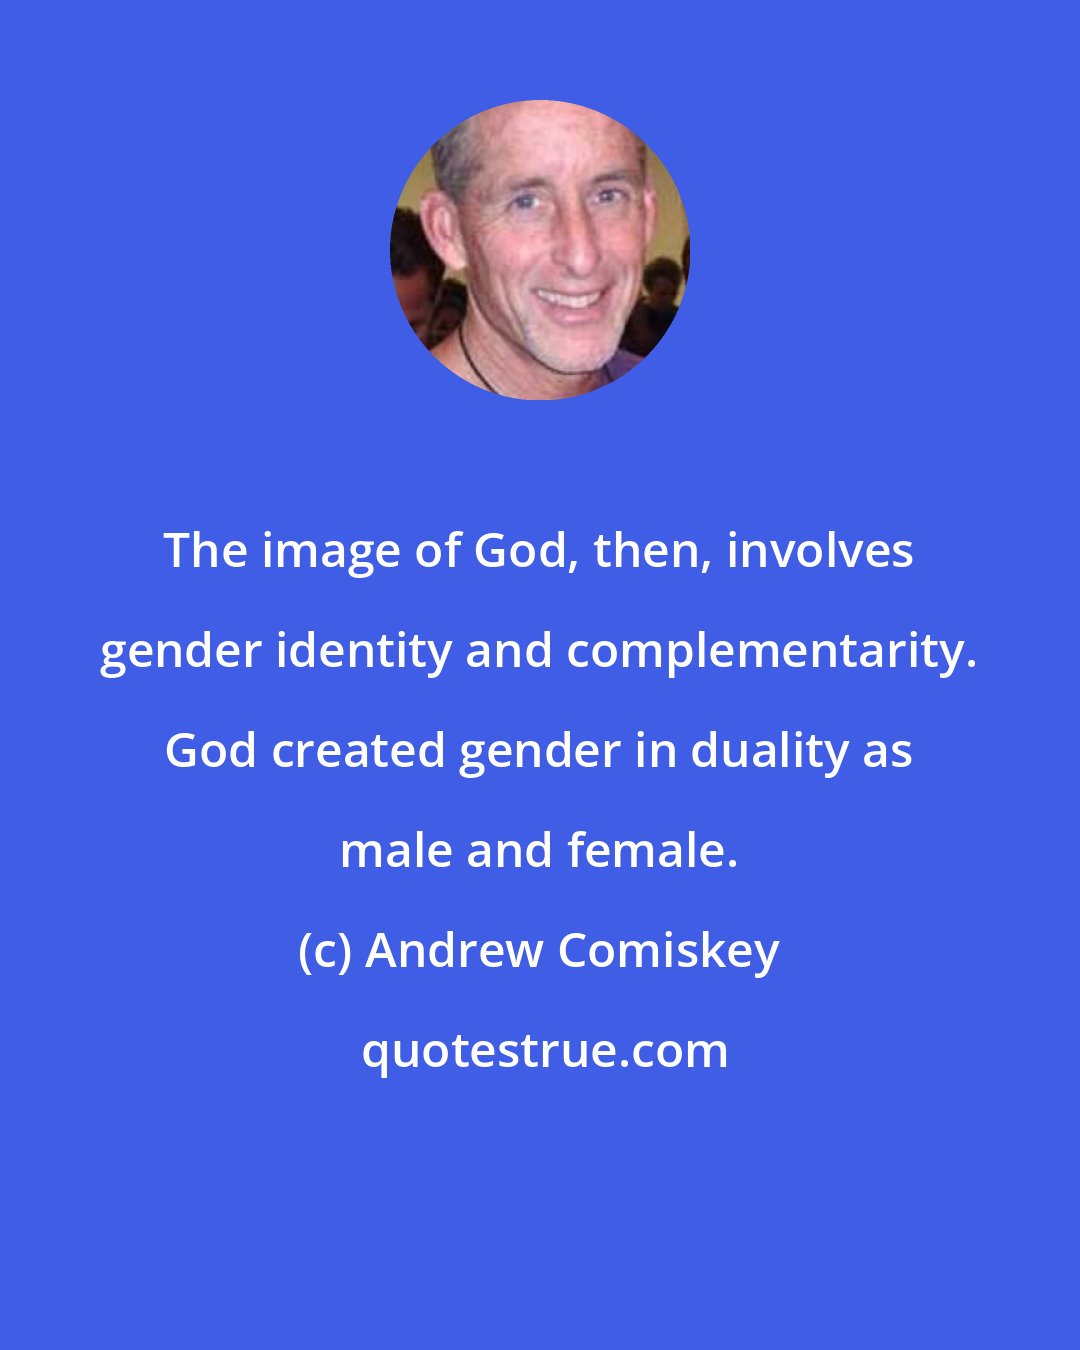 Andrew Comiskey: The image of God, then, involves gender identity and complementarity. God created gender in duality as male and female.